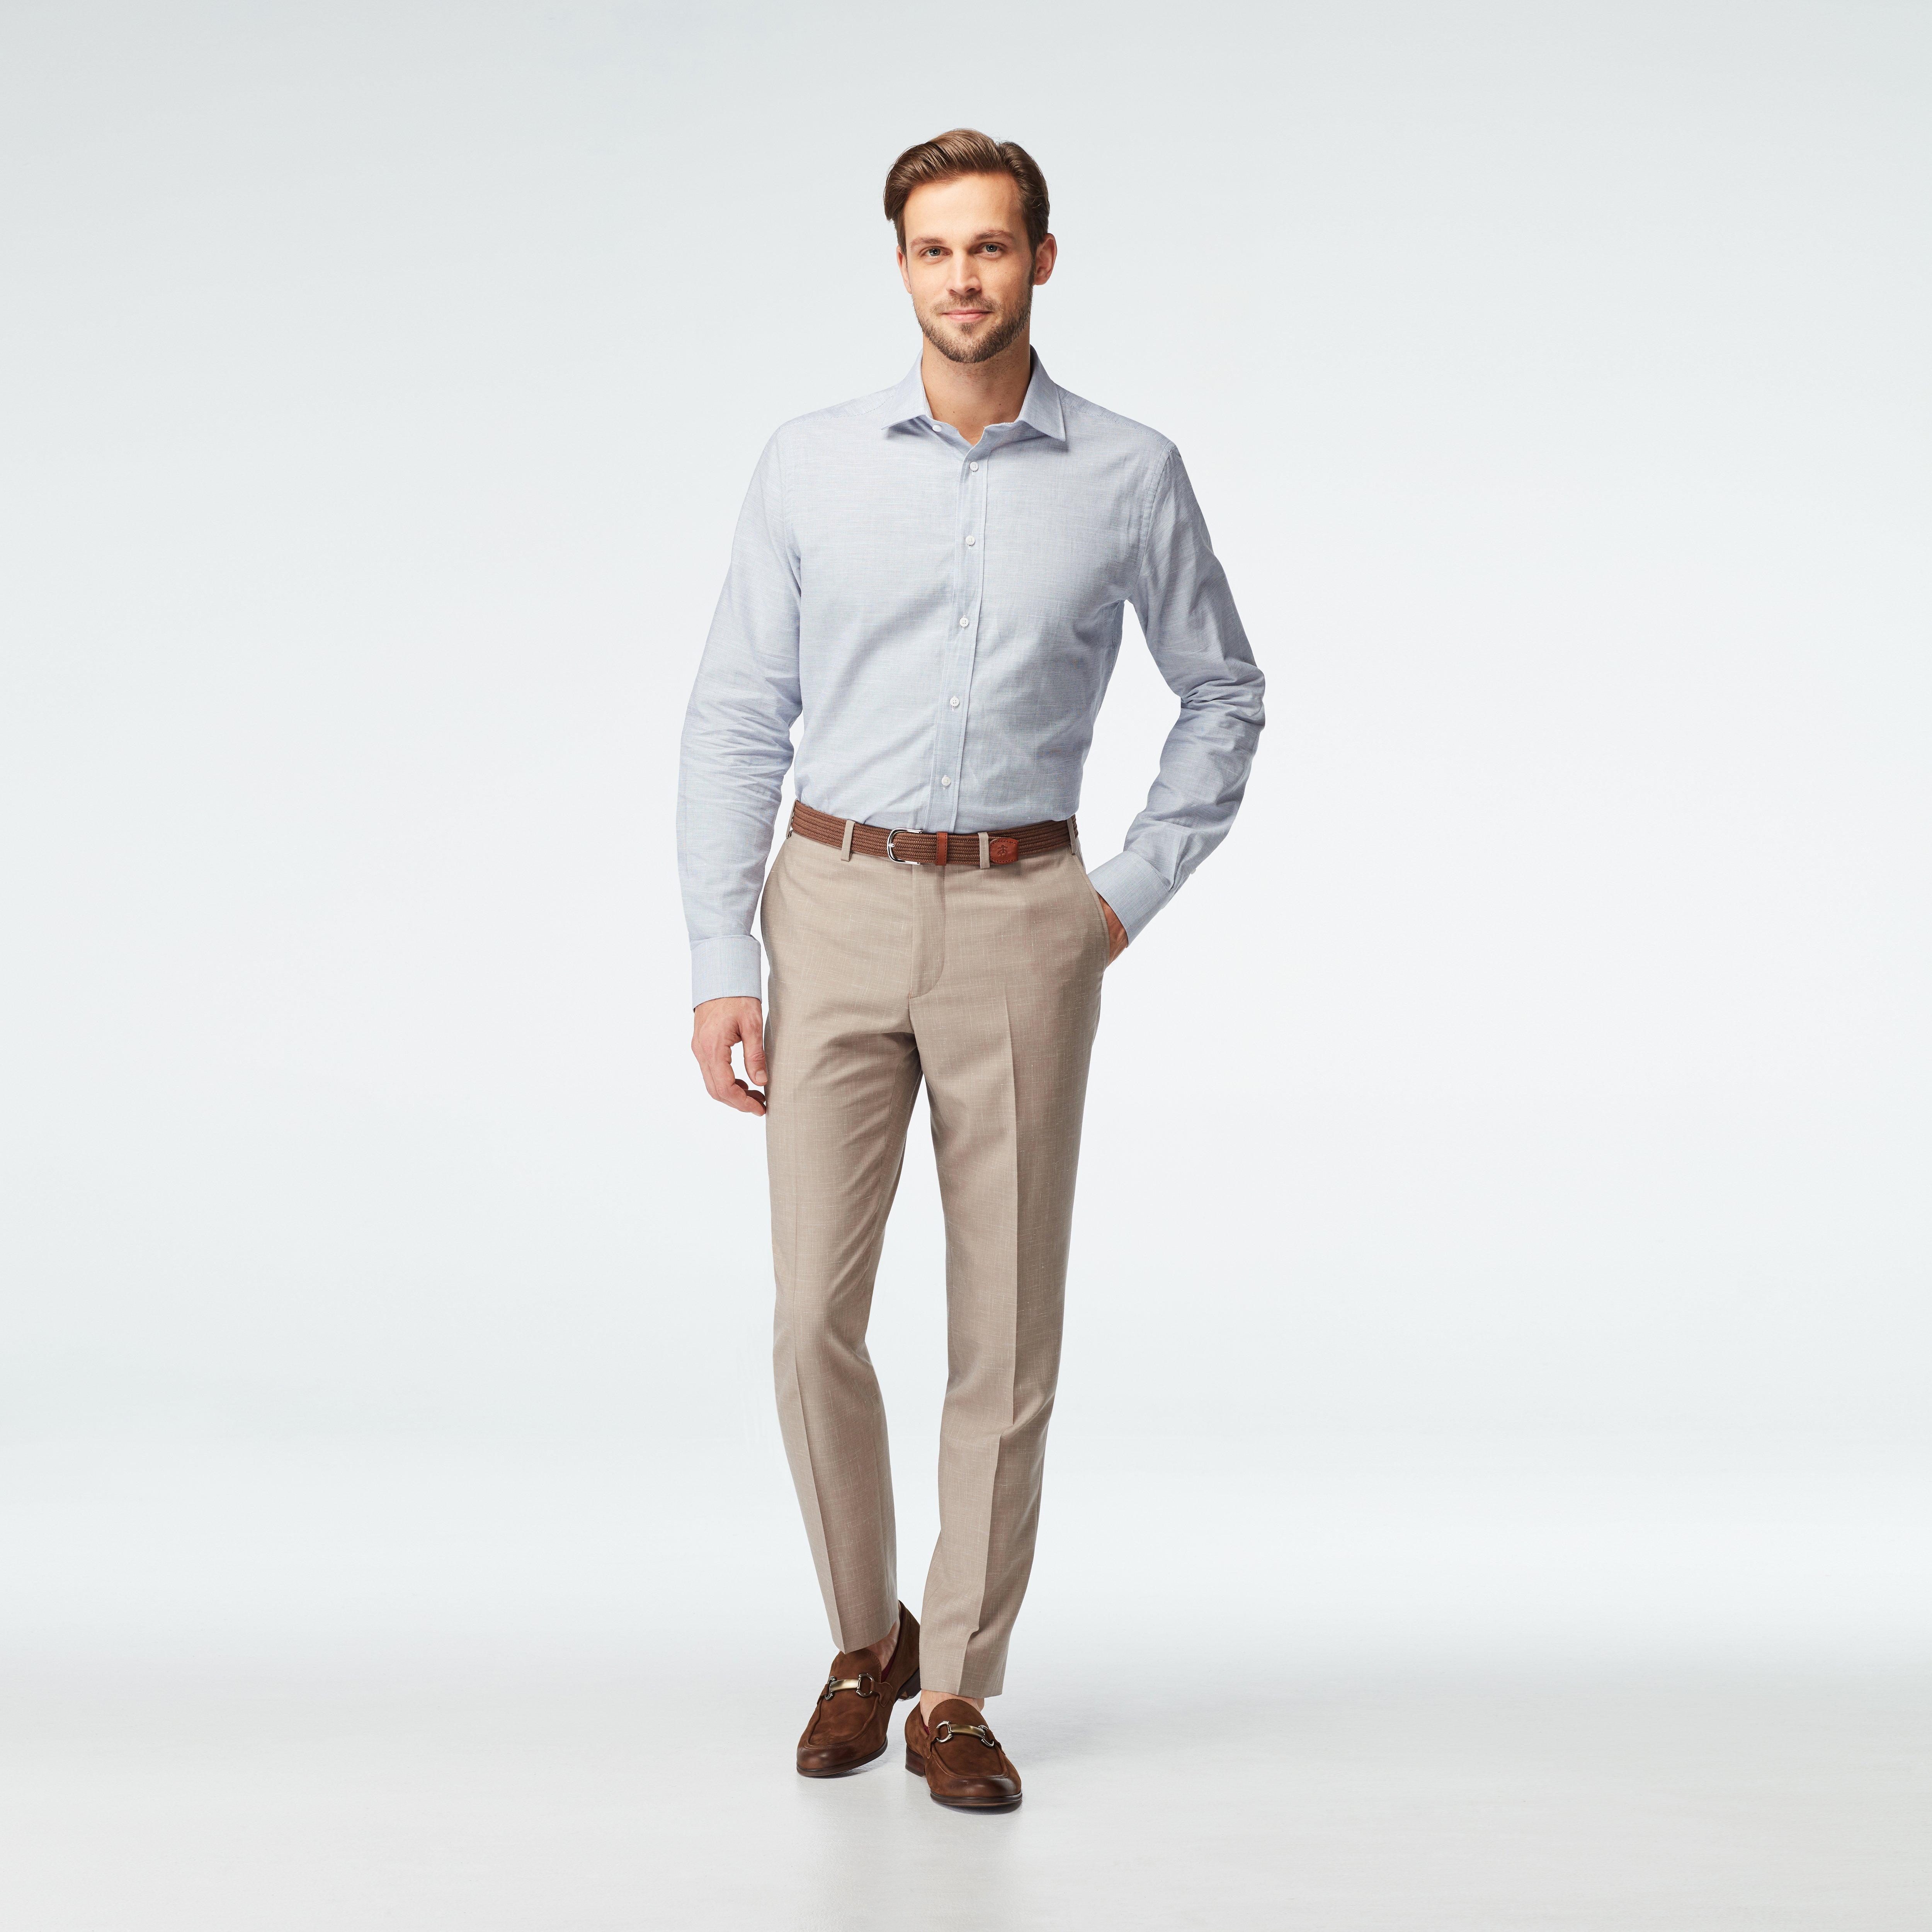 Custom Suits Made For You - Stockport Wool Linen Sand Suit | INDOCHINO